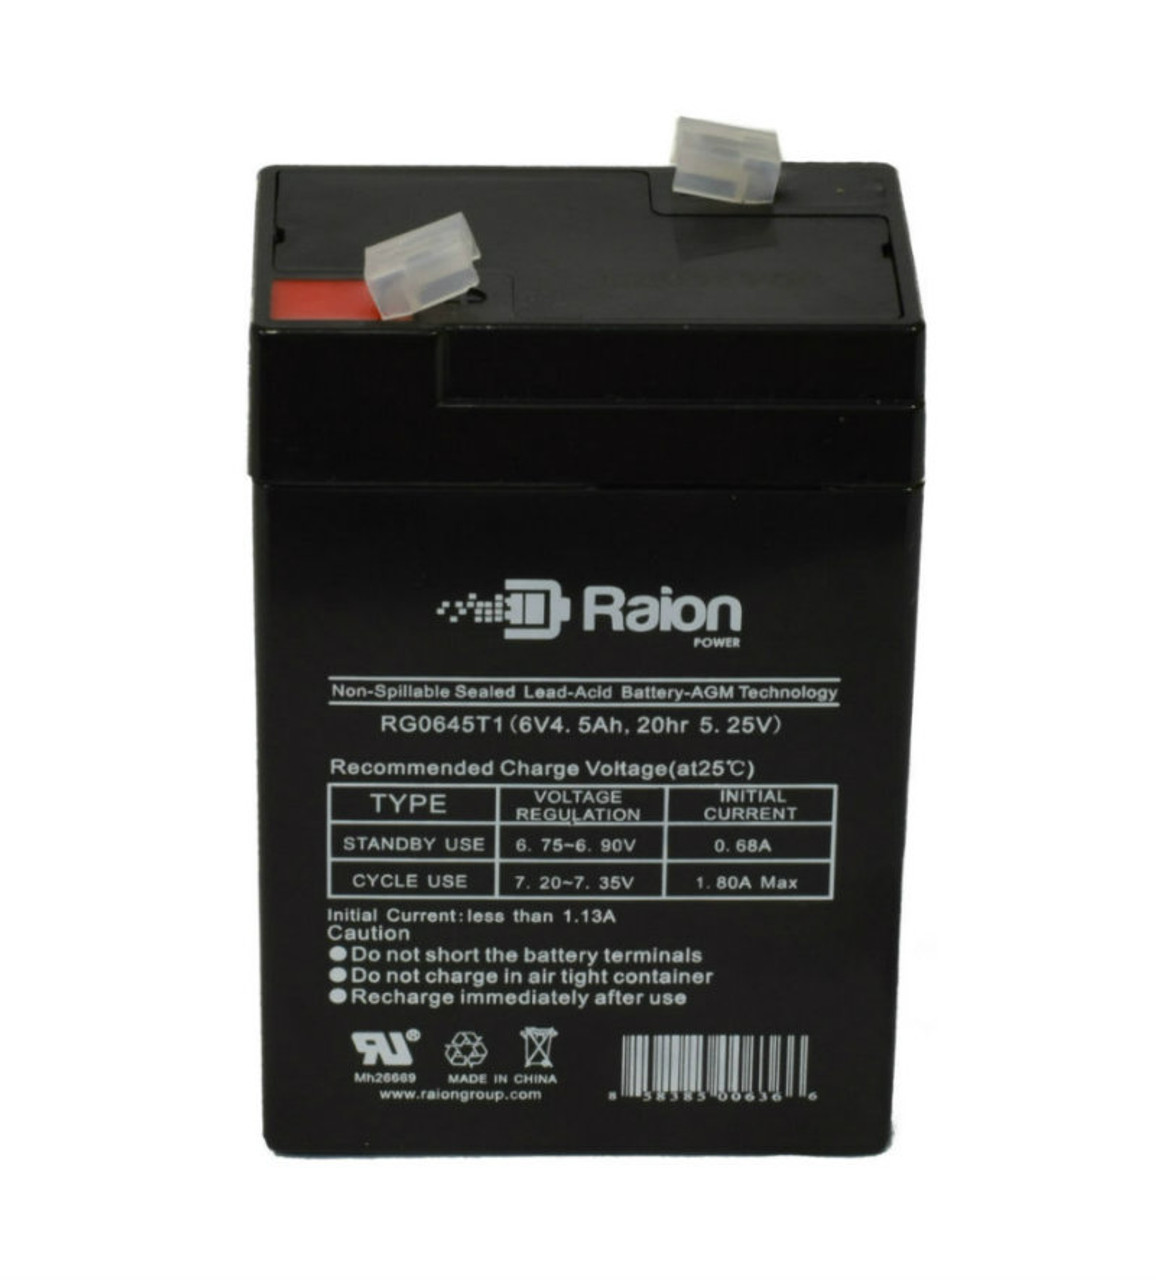 Raion Power RG0645T1 Replacement Battery Cartridge for Peg Perego IGED1088 6V John Deere Express